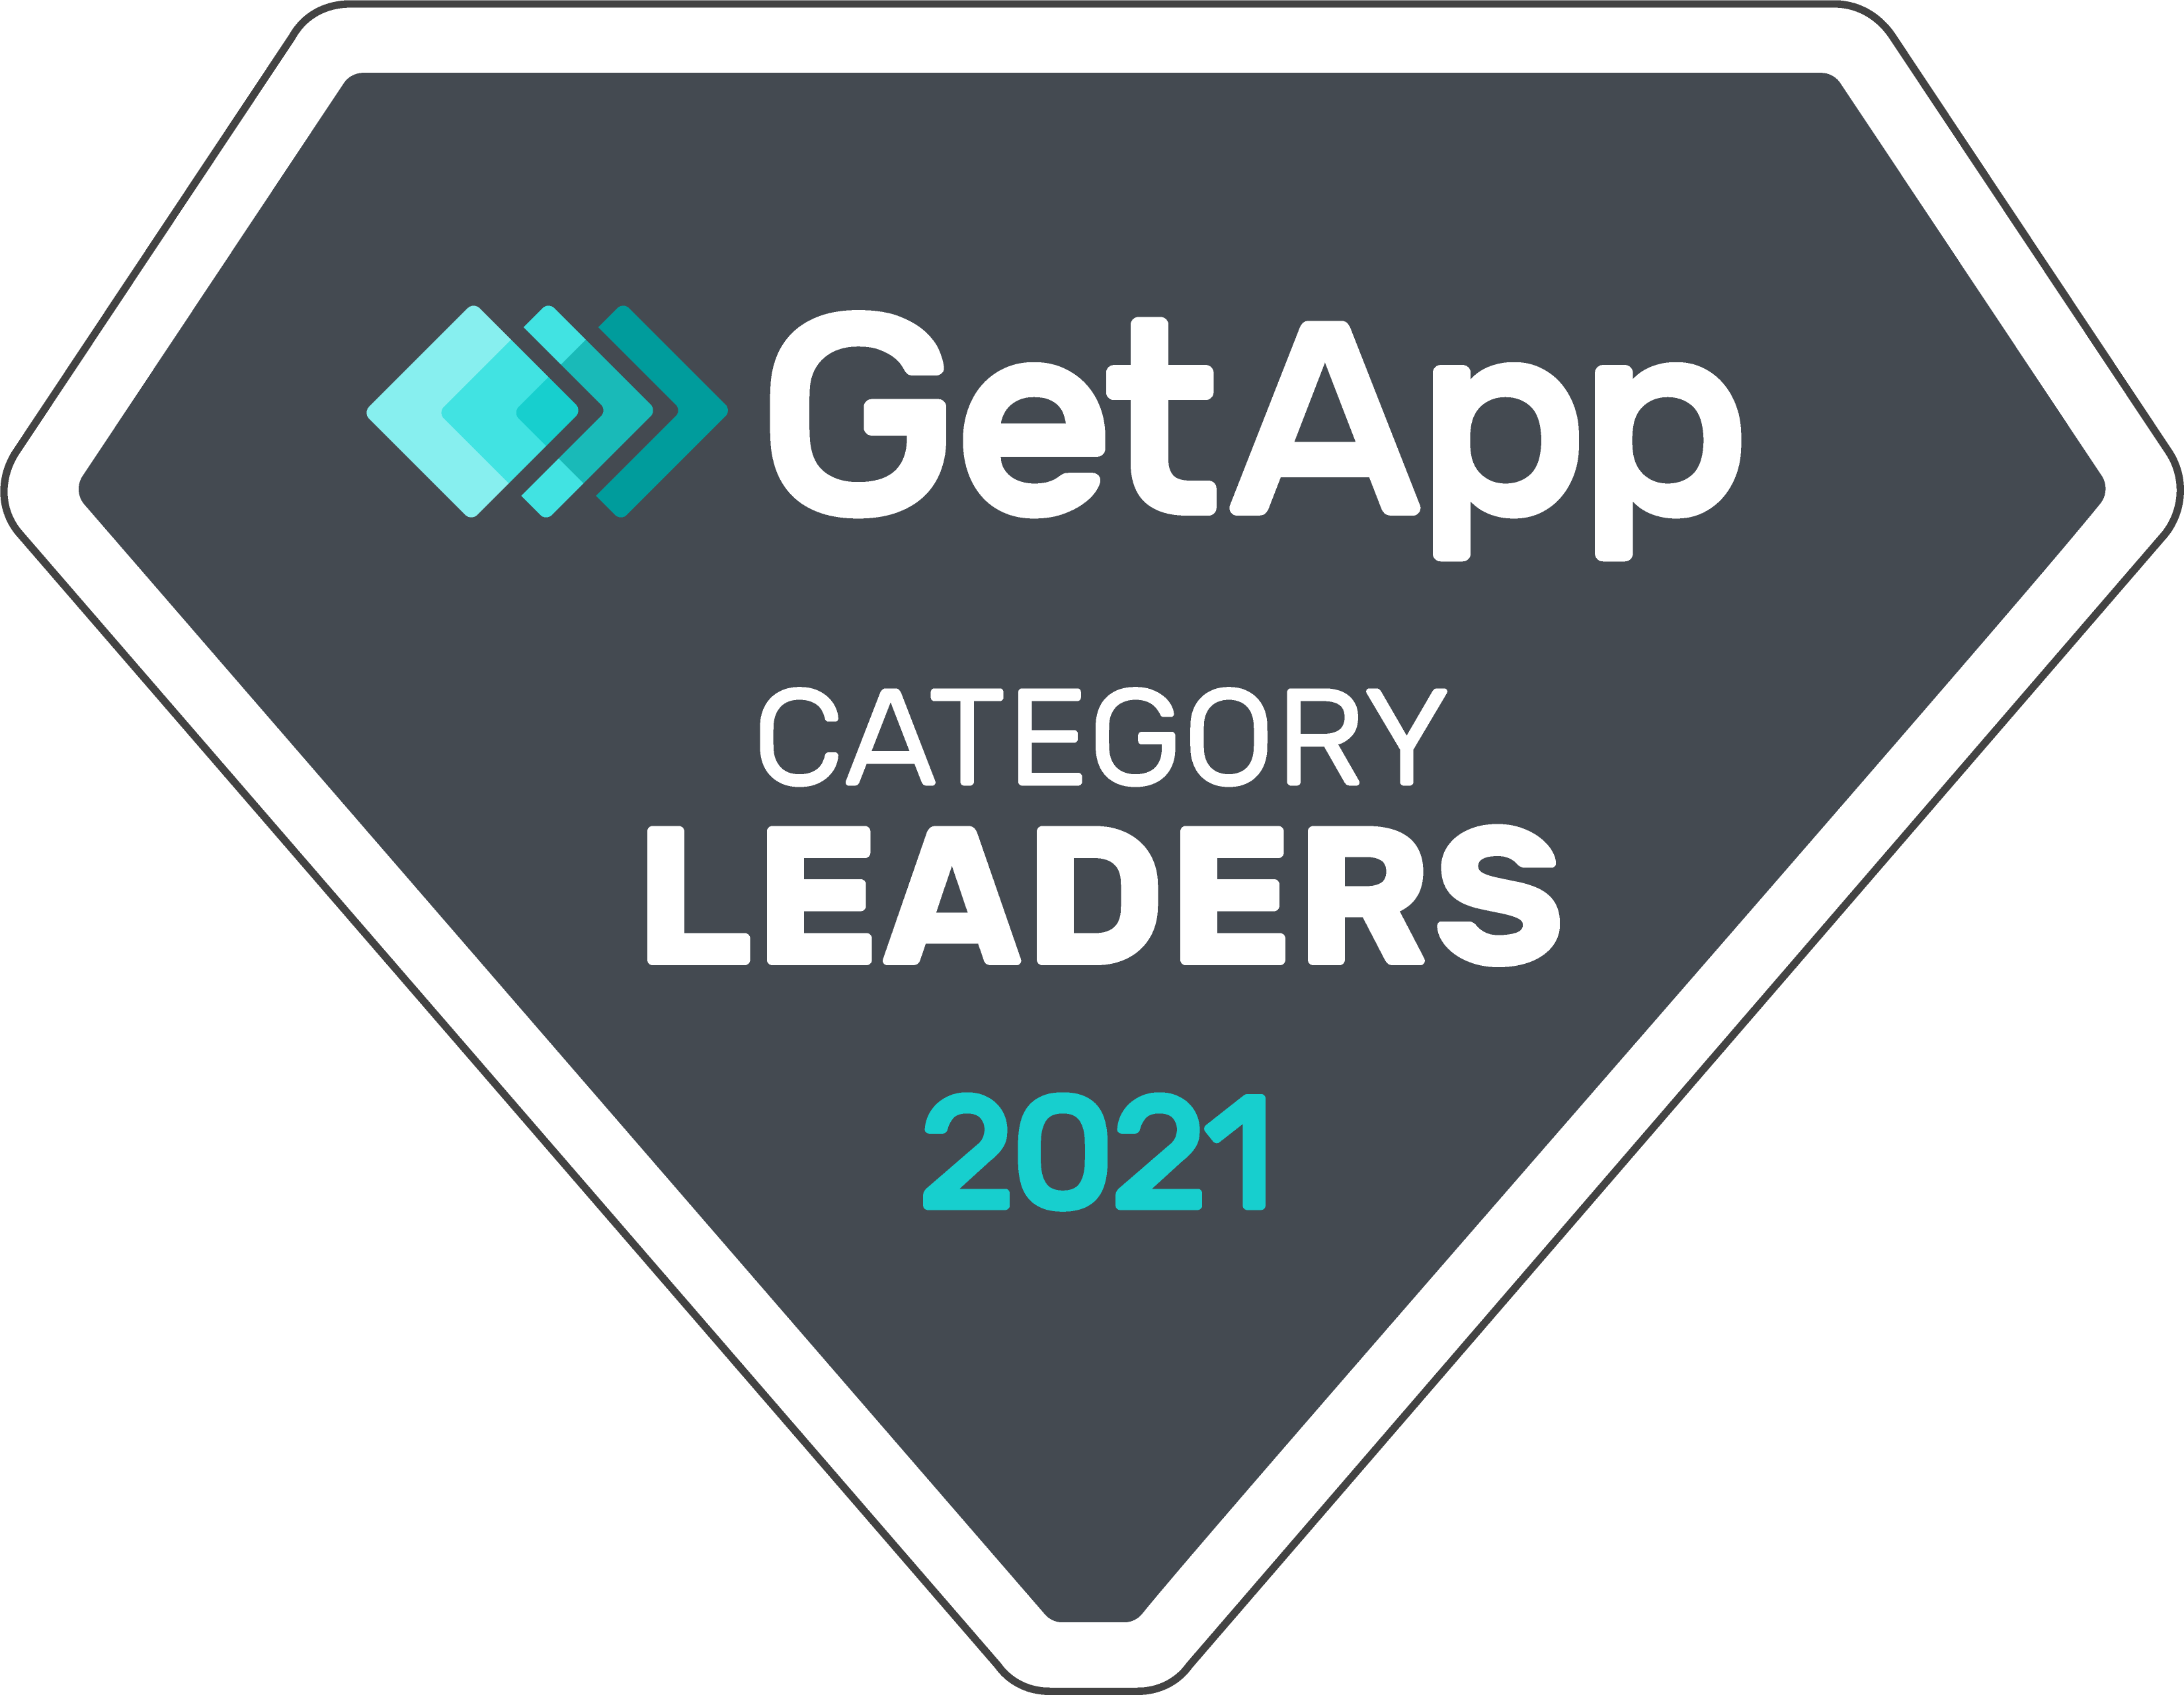 GetApp's Category Leaders for 2021